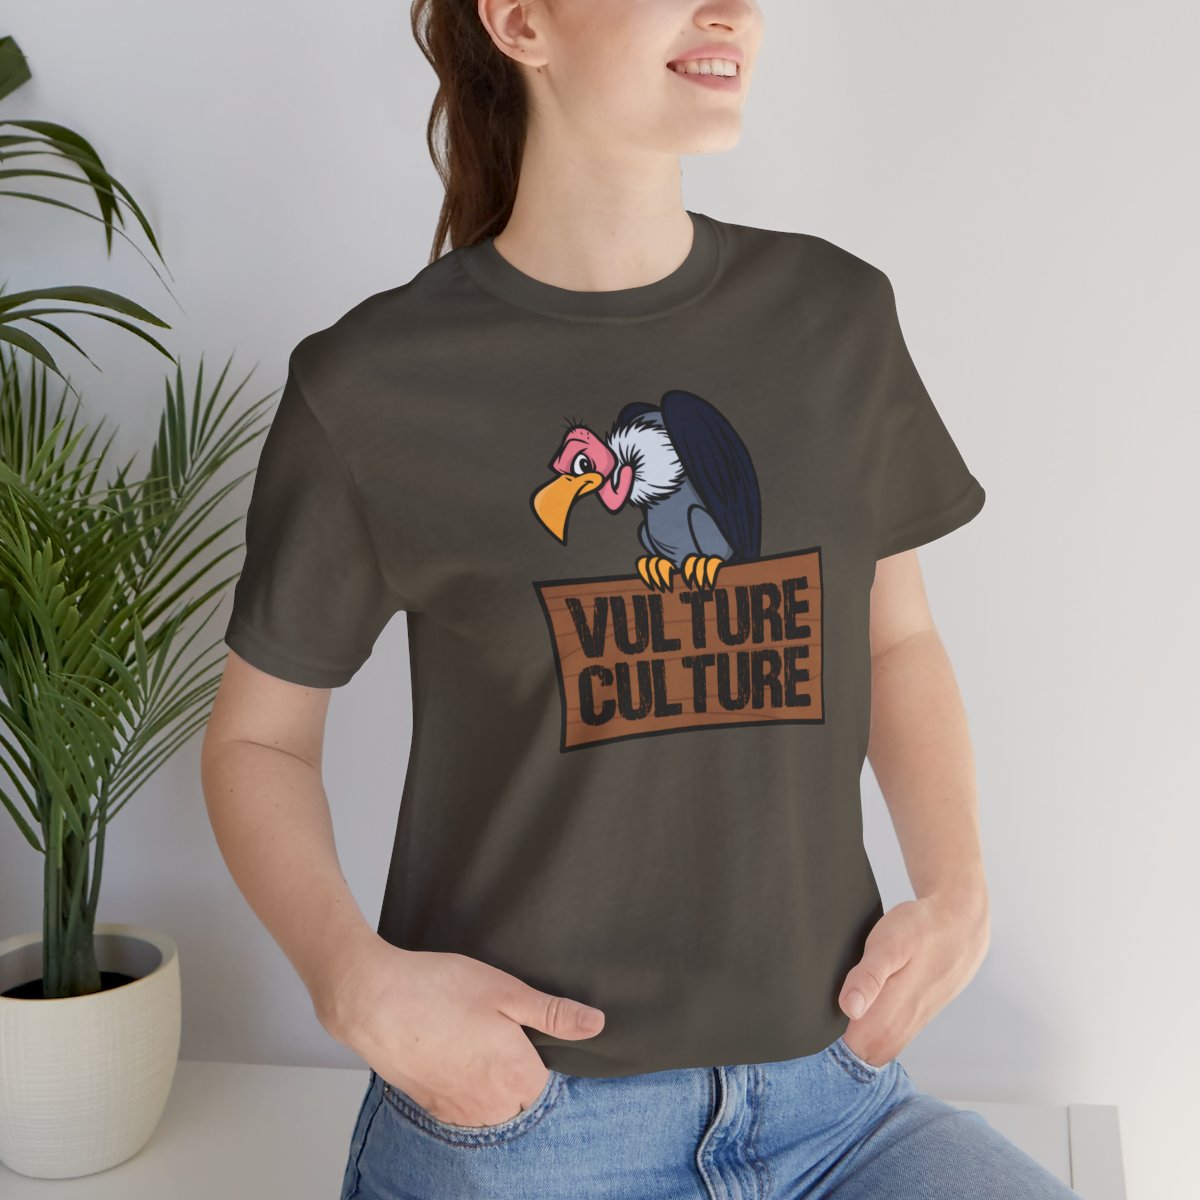 Vulture Culture Unisex S/S Tee product thumbnail image